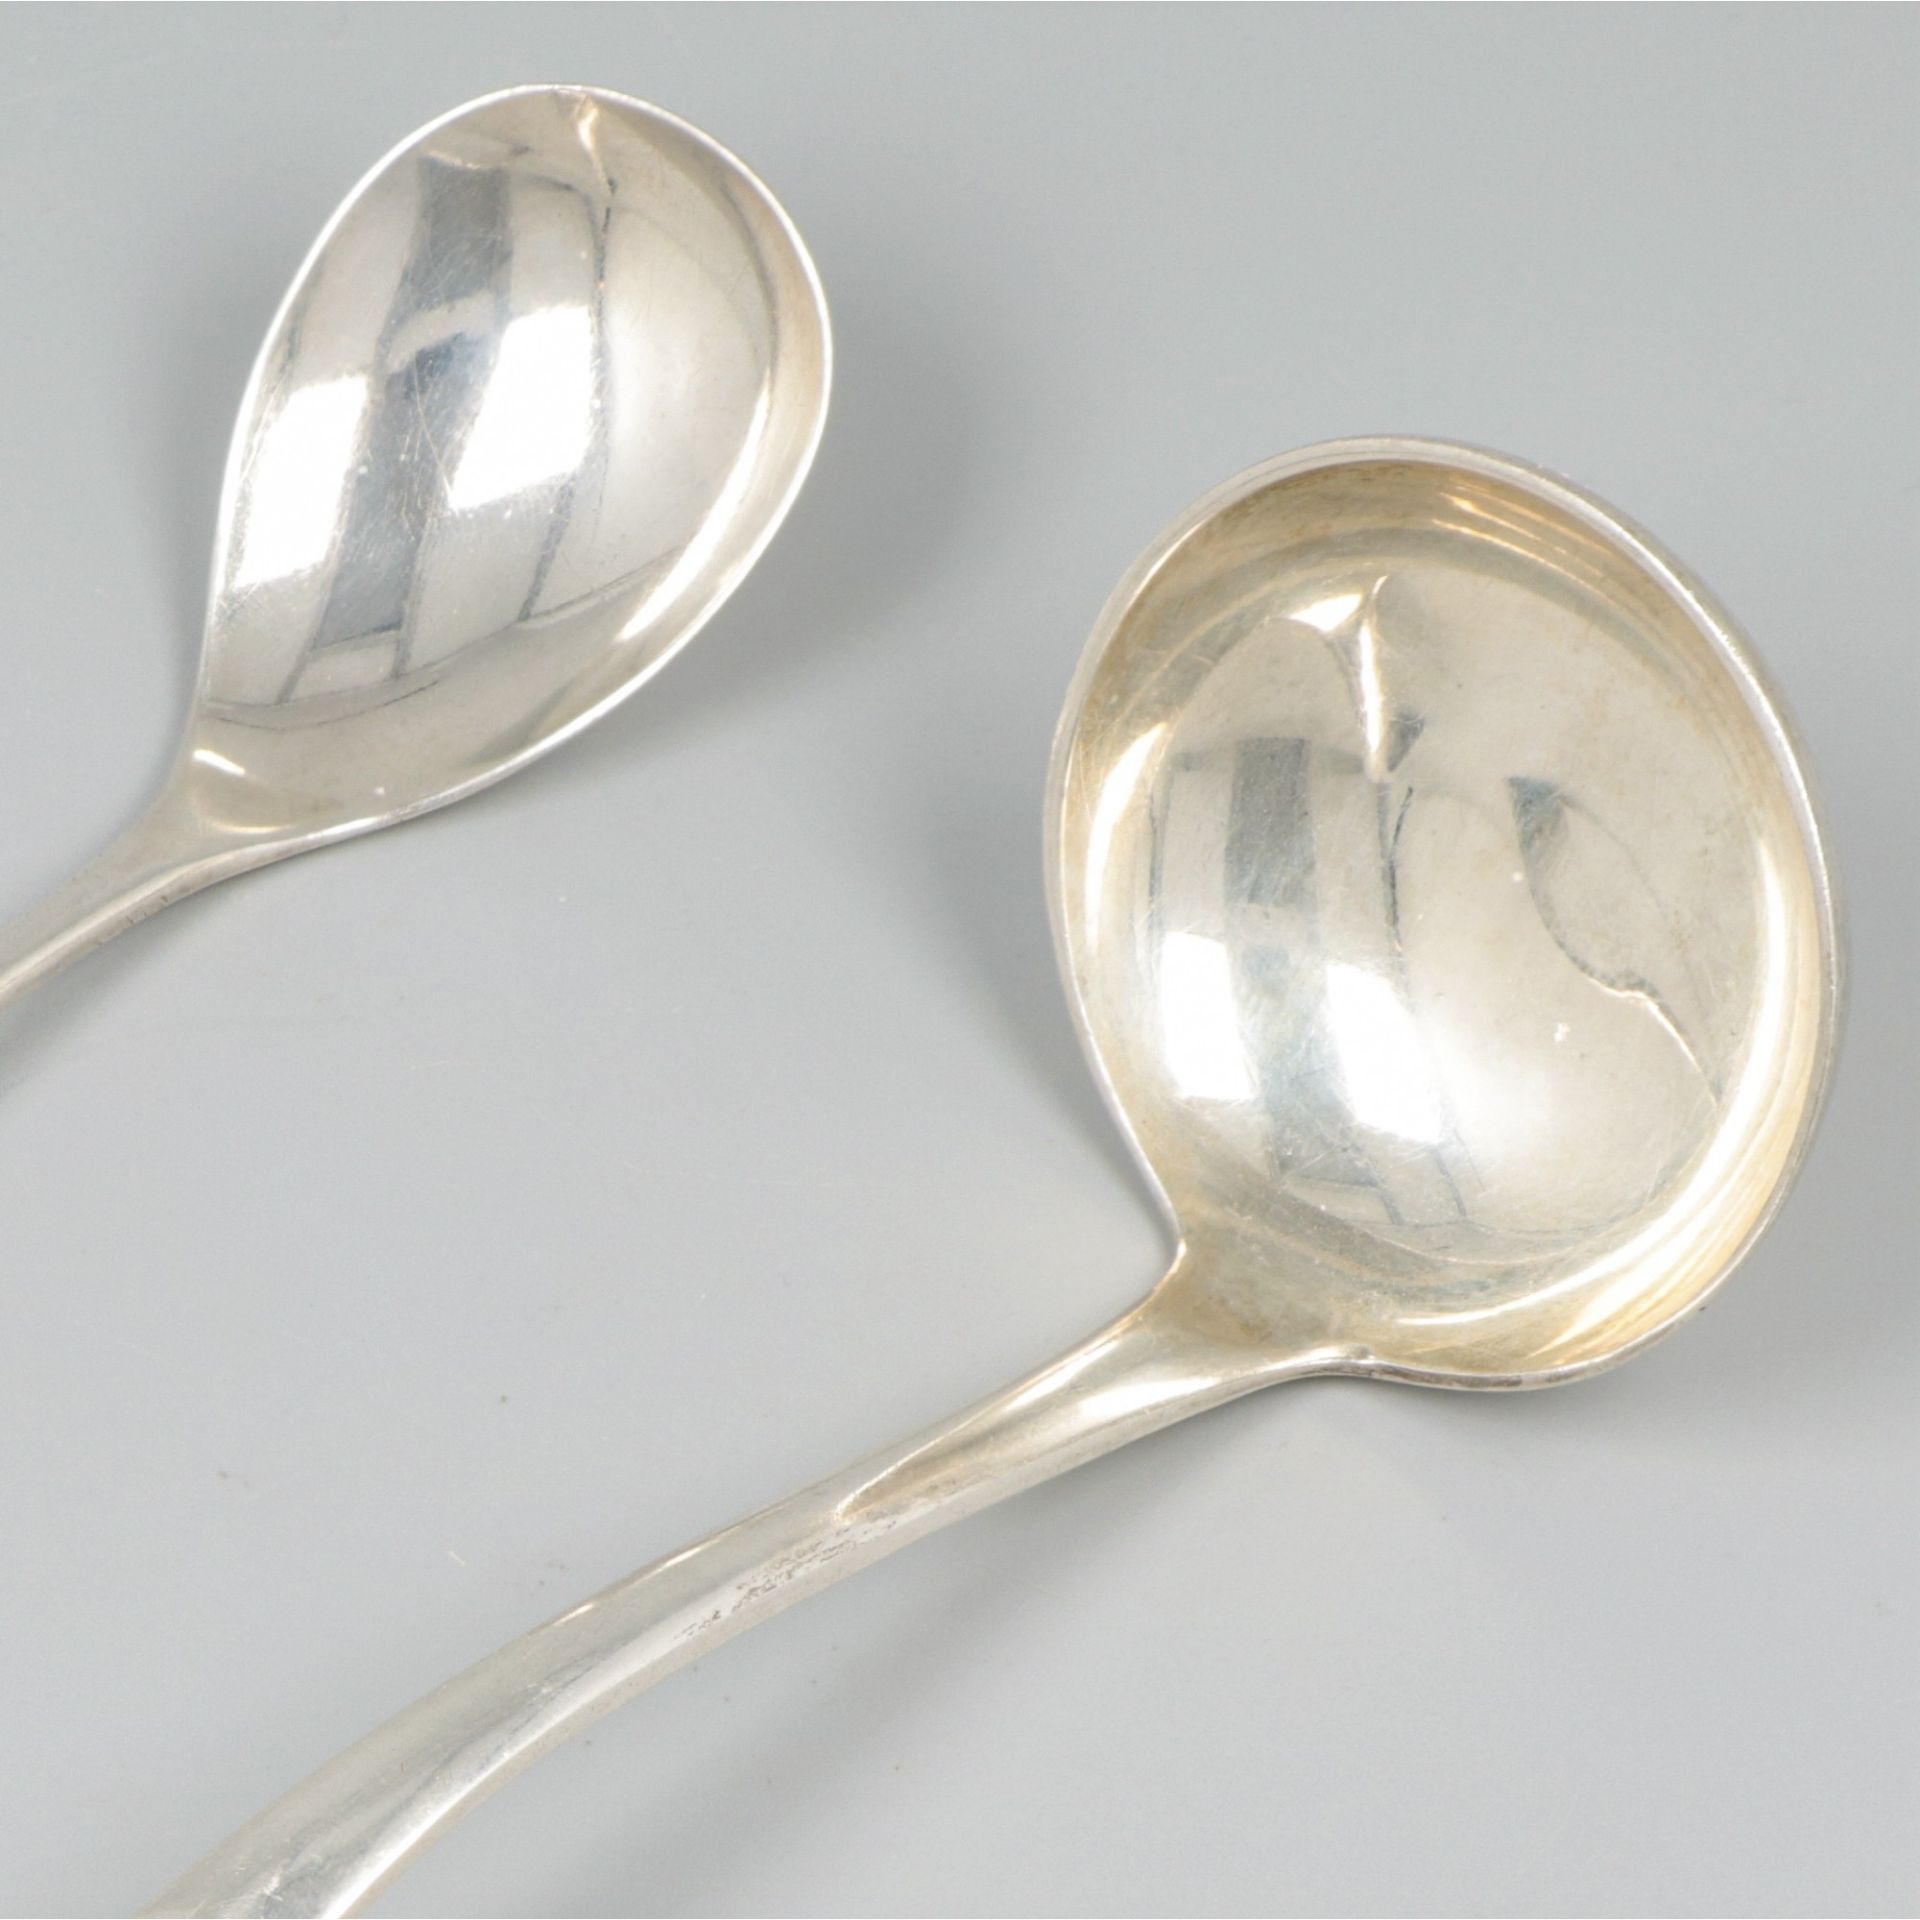 Sauce spoon and jam spoon silver. - Image 4 of 8